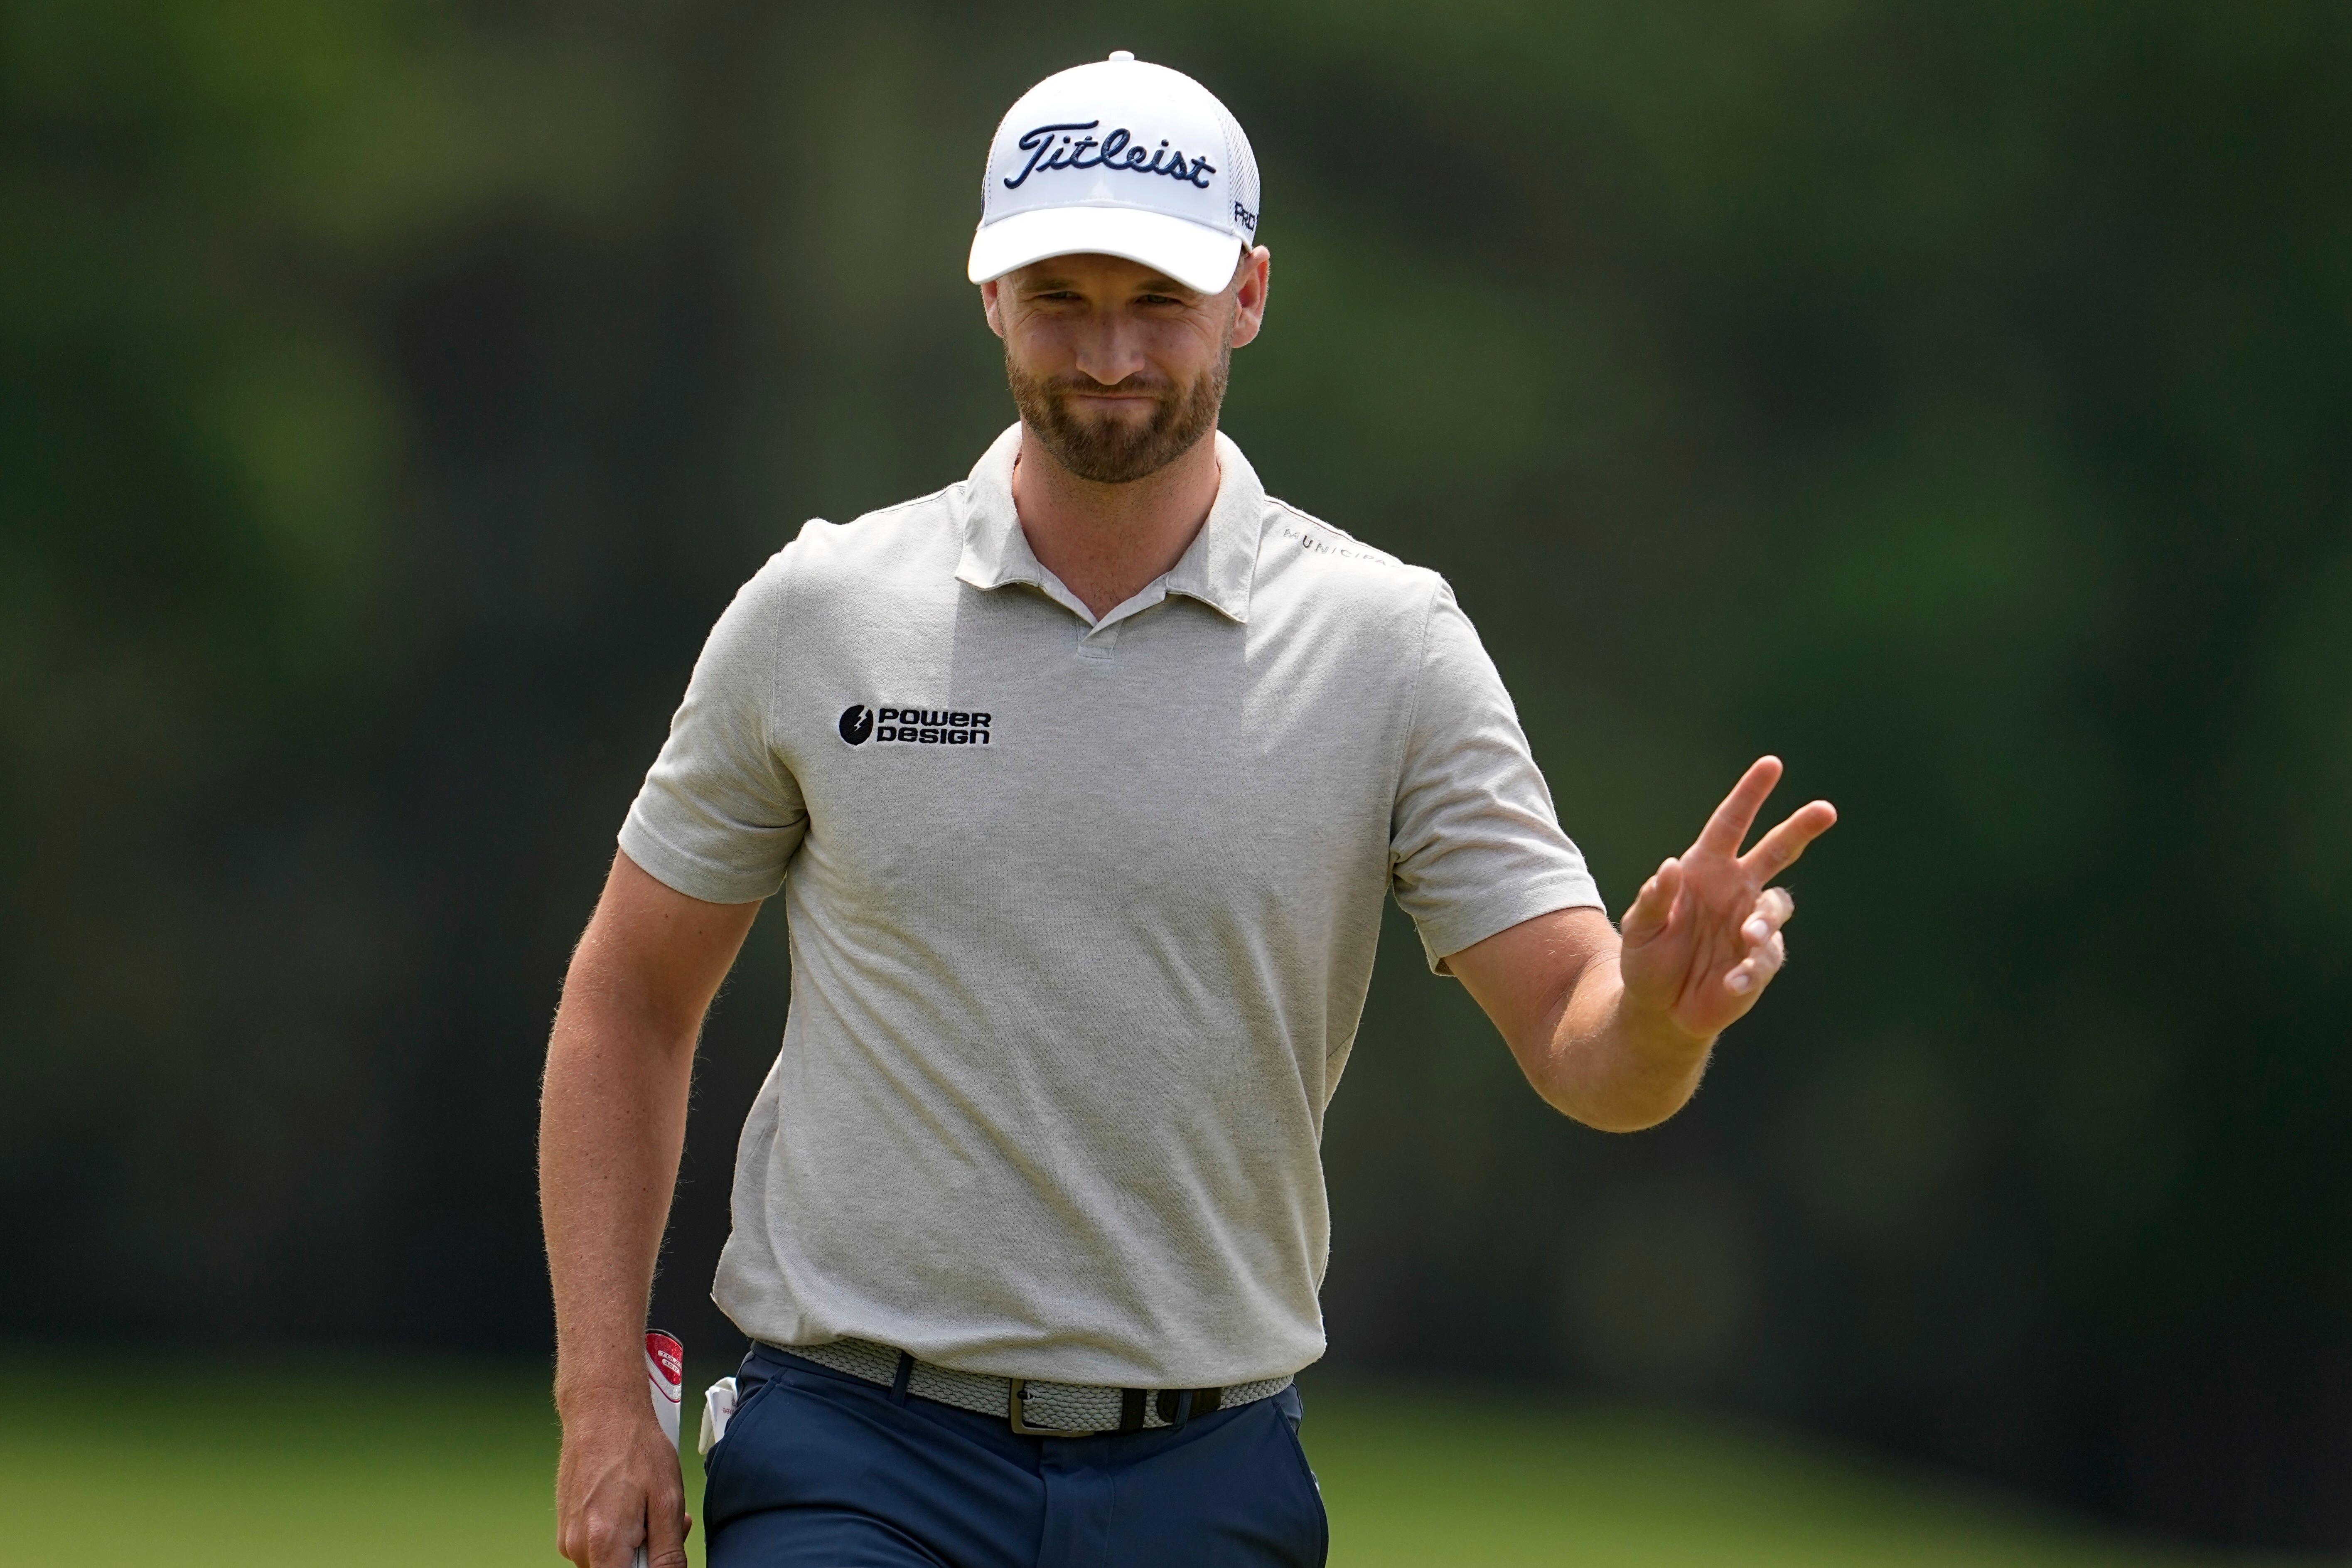 American Wyndham Clark shot a bogey-free day to go two strokes clear of the pack while English pair Tyrrell Hatton and Tommy Fleetwood are still in the mix after day three of the Wells Fargo Championship in Charlotte on Saturday (Chris Carlson/AP)